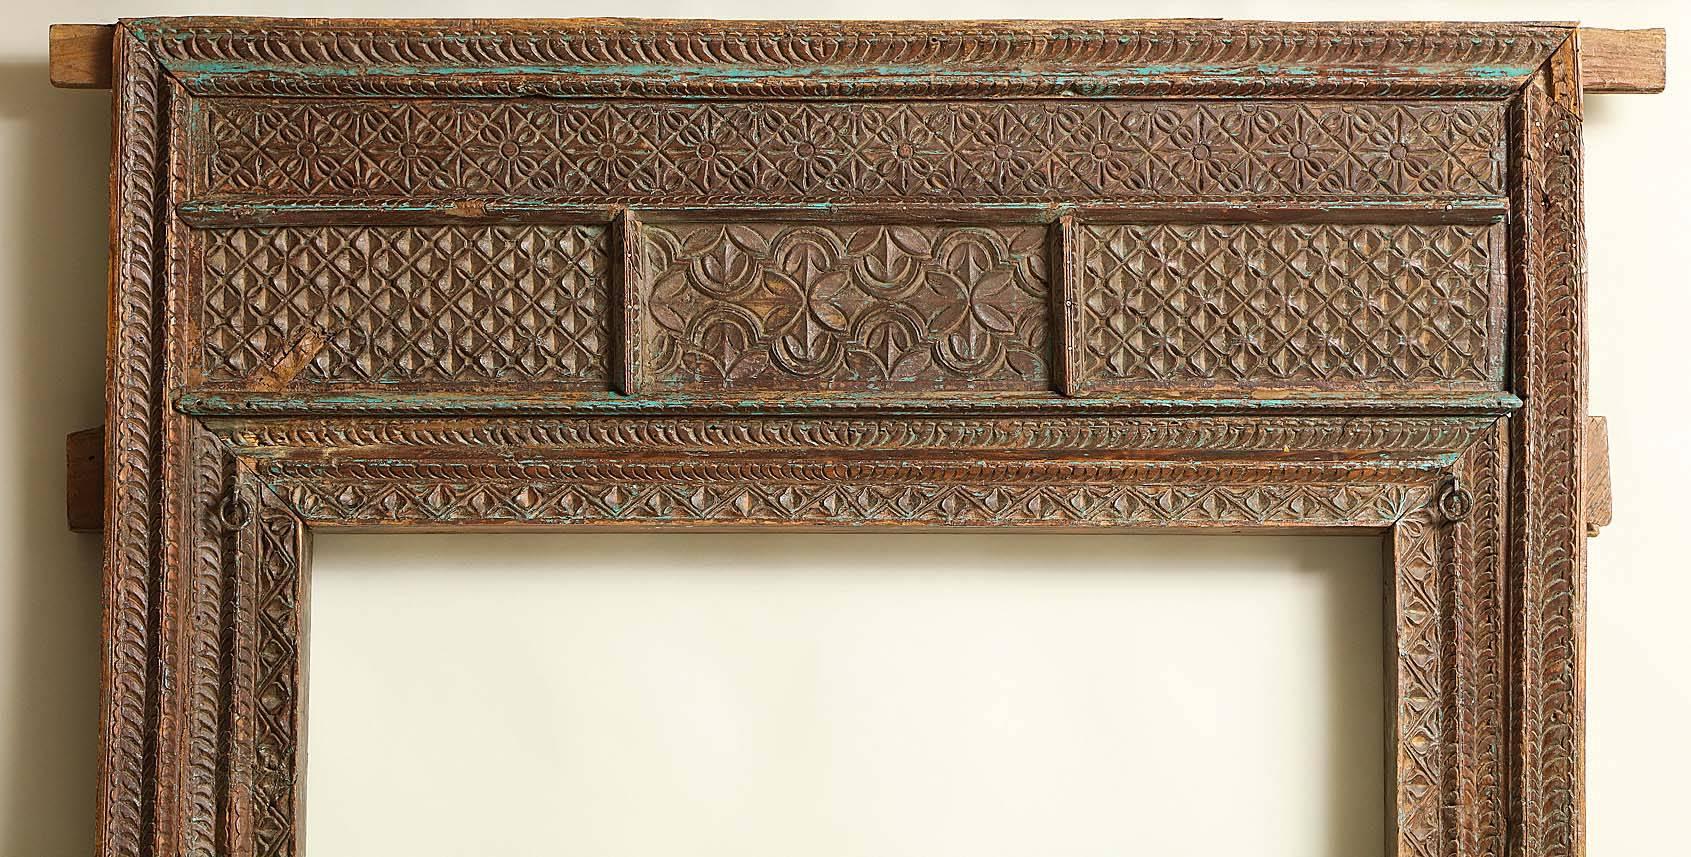 Very good Indian 19th century (or earlier) chip carved doorway with geometric patterns and retaining some original blue pigment, of mitered mortise and Tenon construction which dismantles easily for shipment and storage, retaining a lovely surface